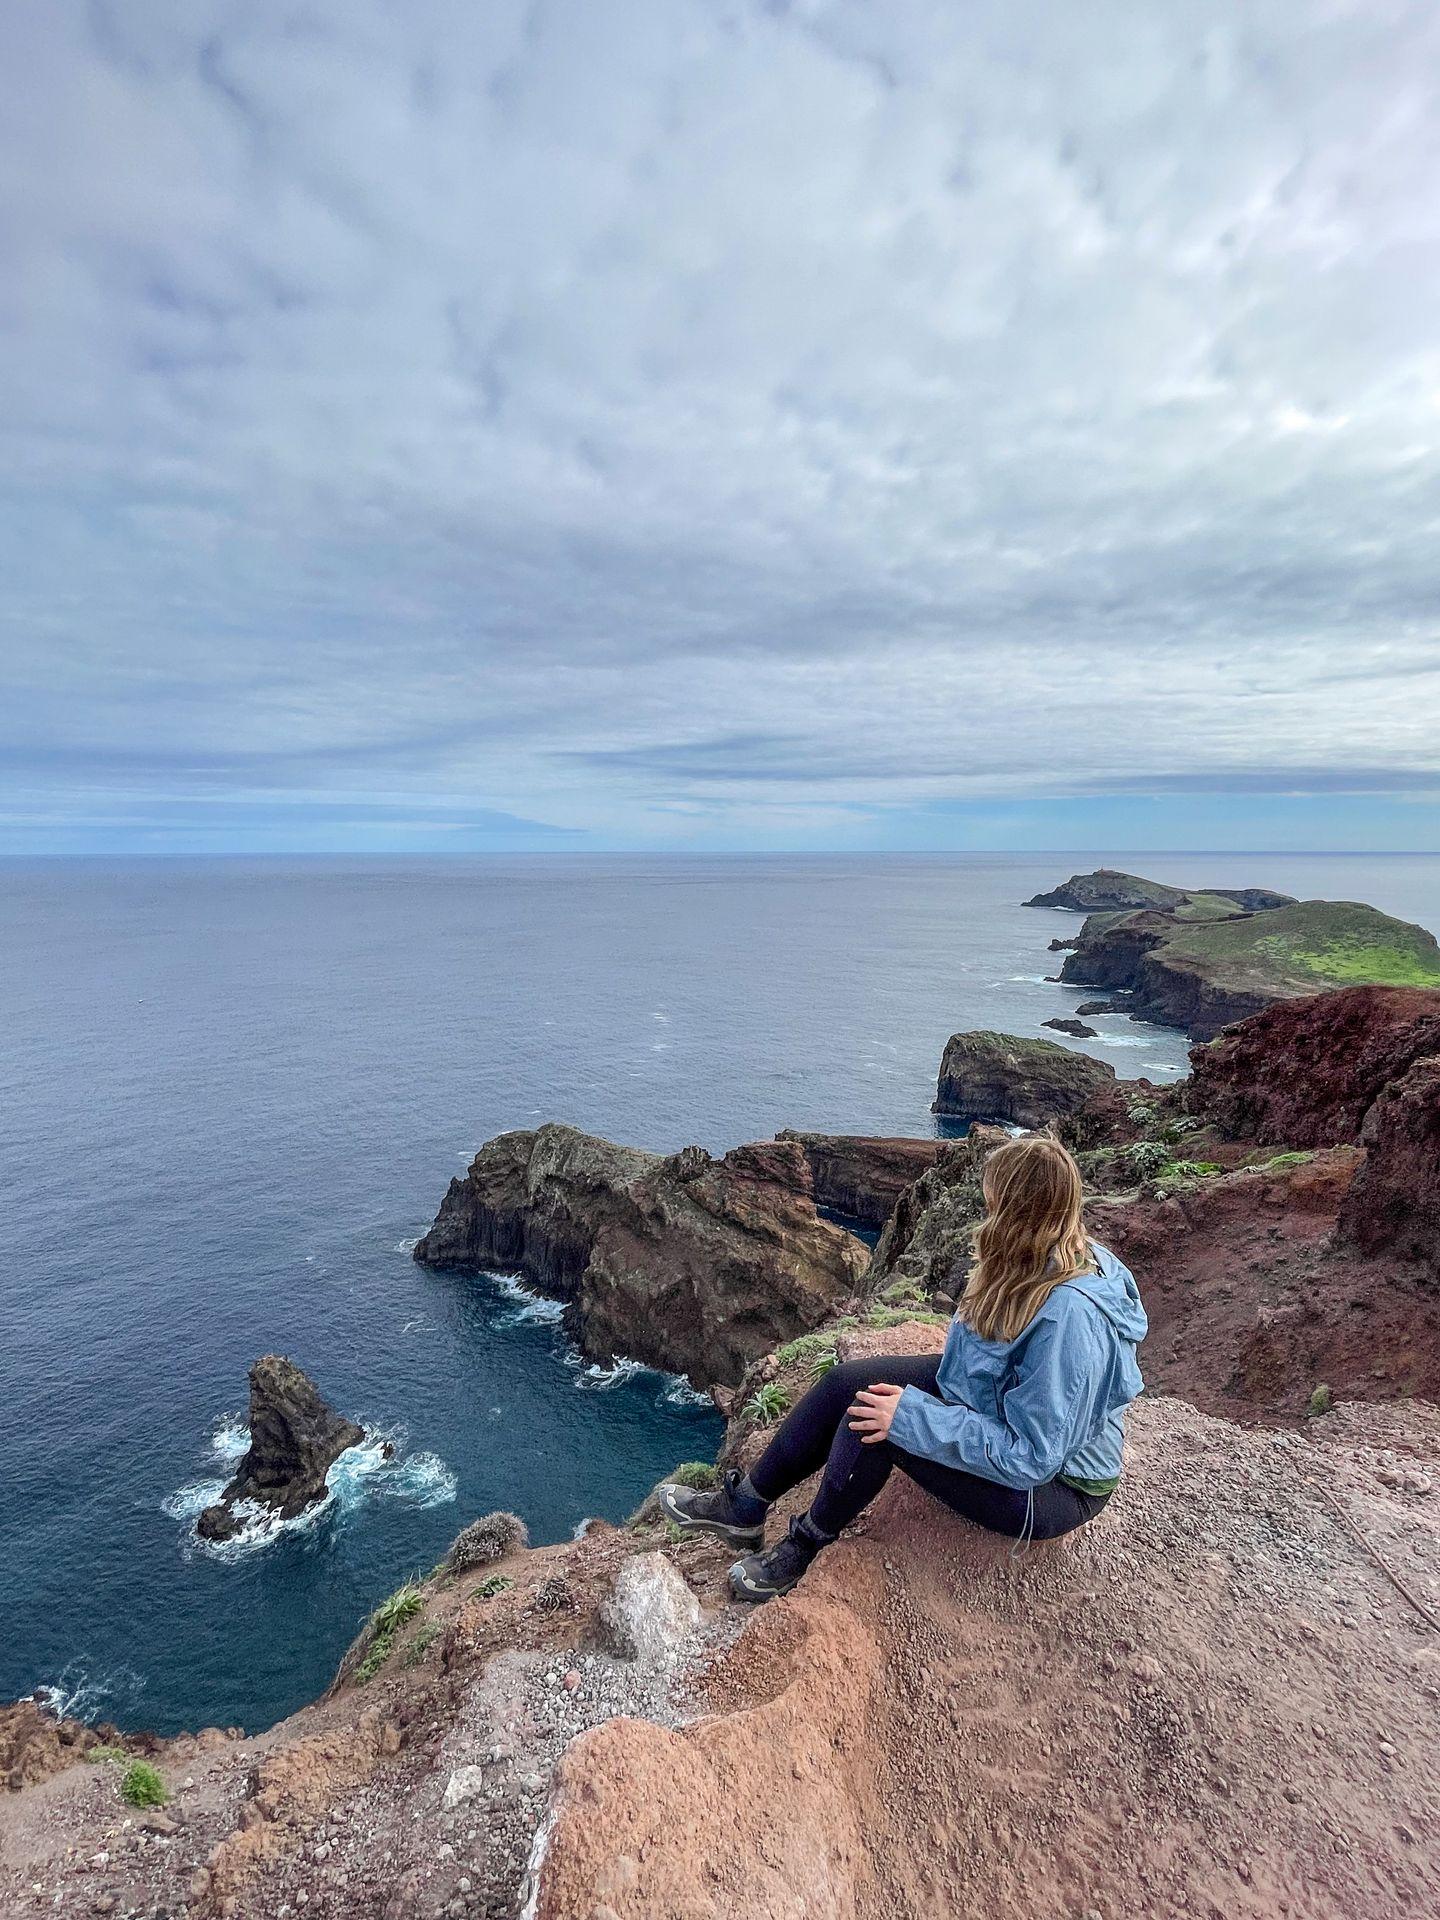 Lydia sitting and looking out at the view from Ponta de Sao Lourenco